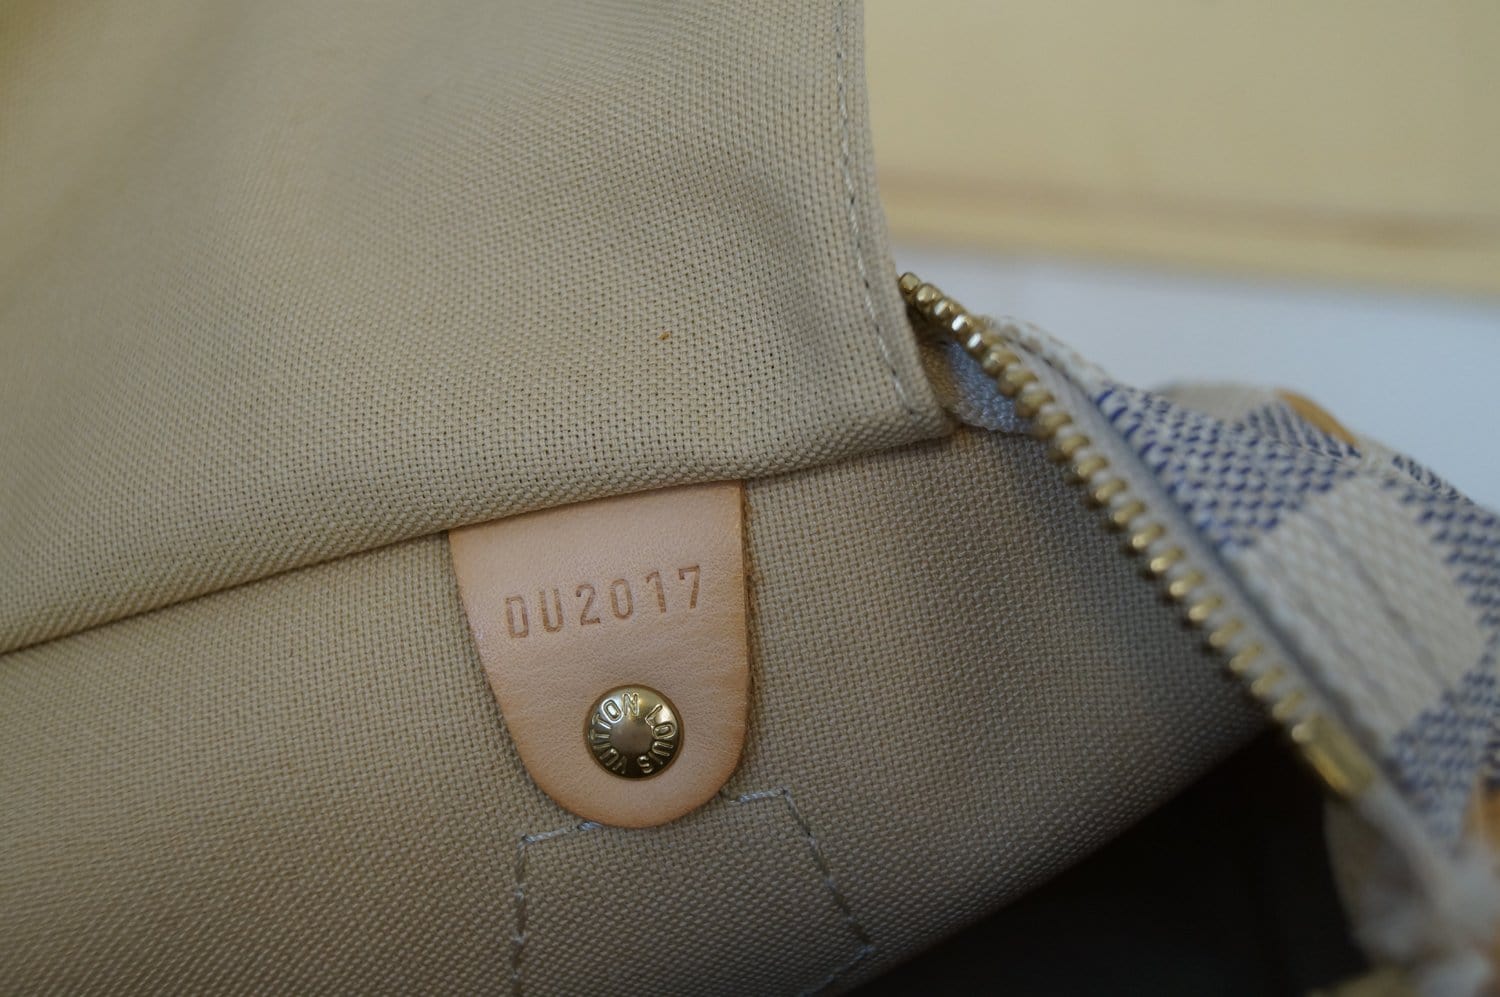 How To Spot Authentic Louis Vuitton Speedy 30 Damier Azur Bag and